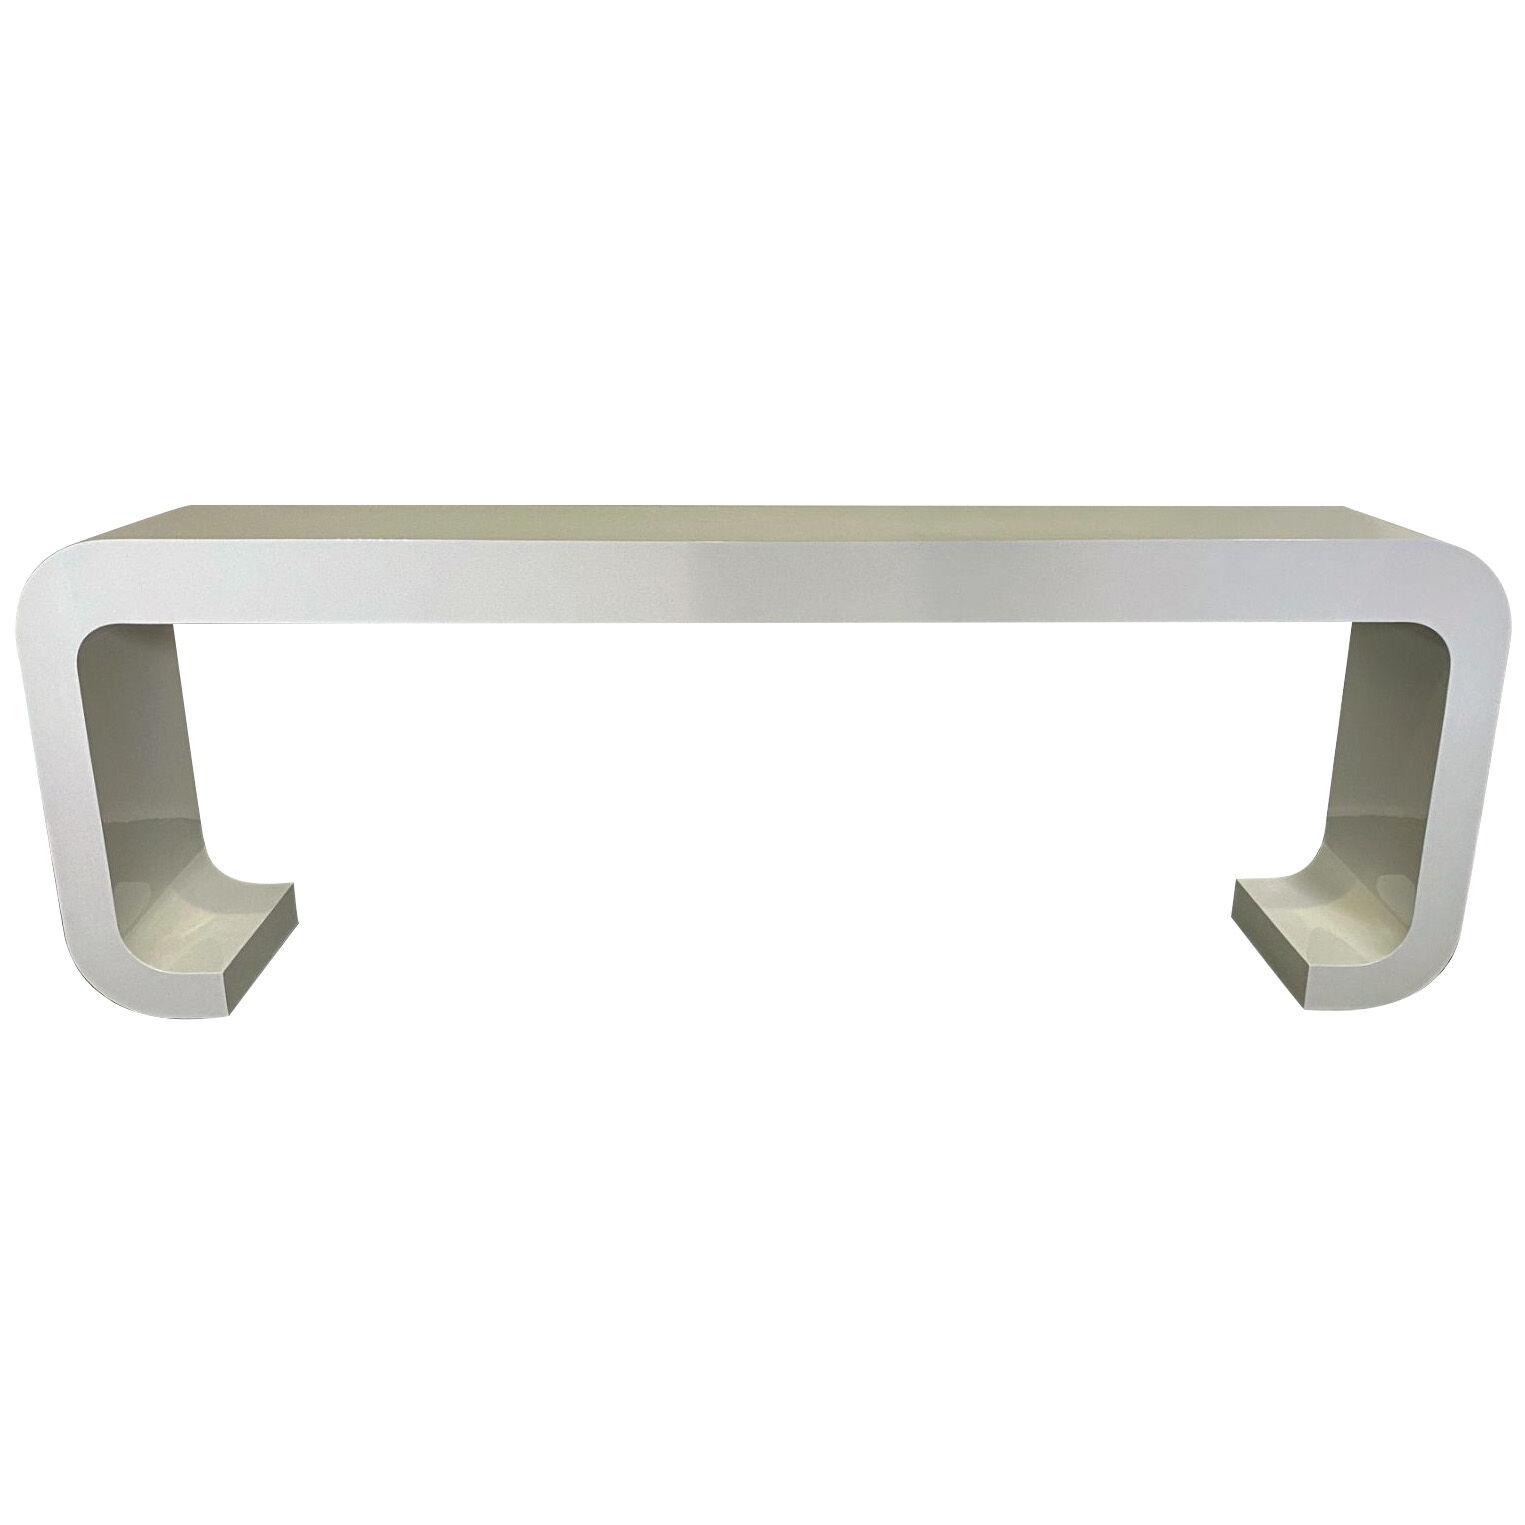 American Modern White Lacquer Waterfall Console Table, Ron Seff